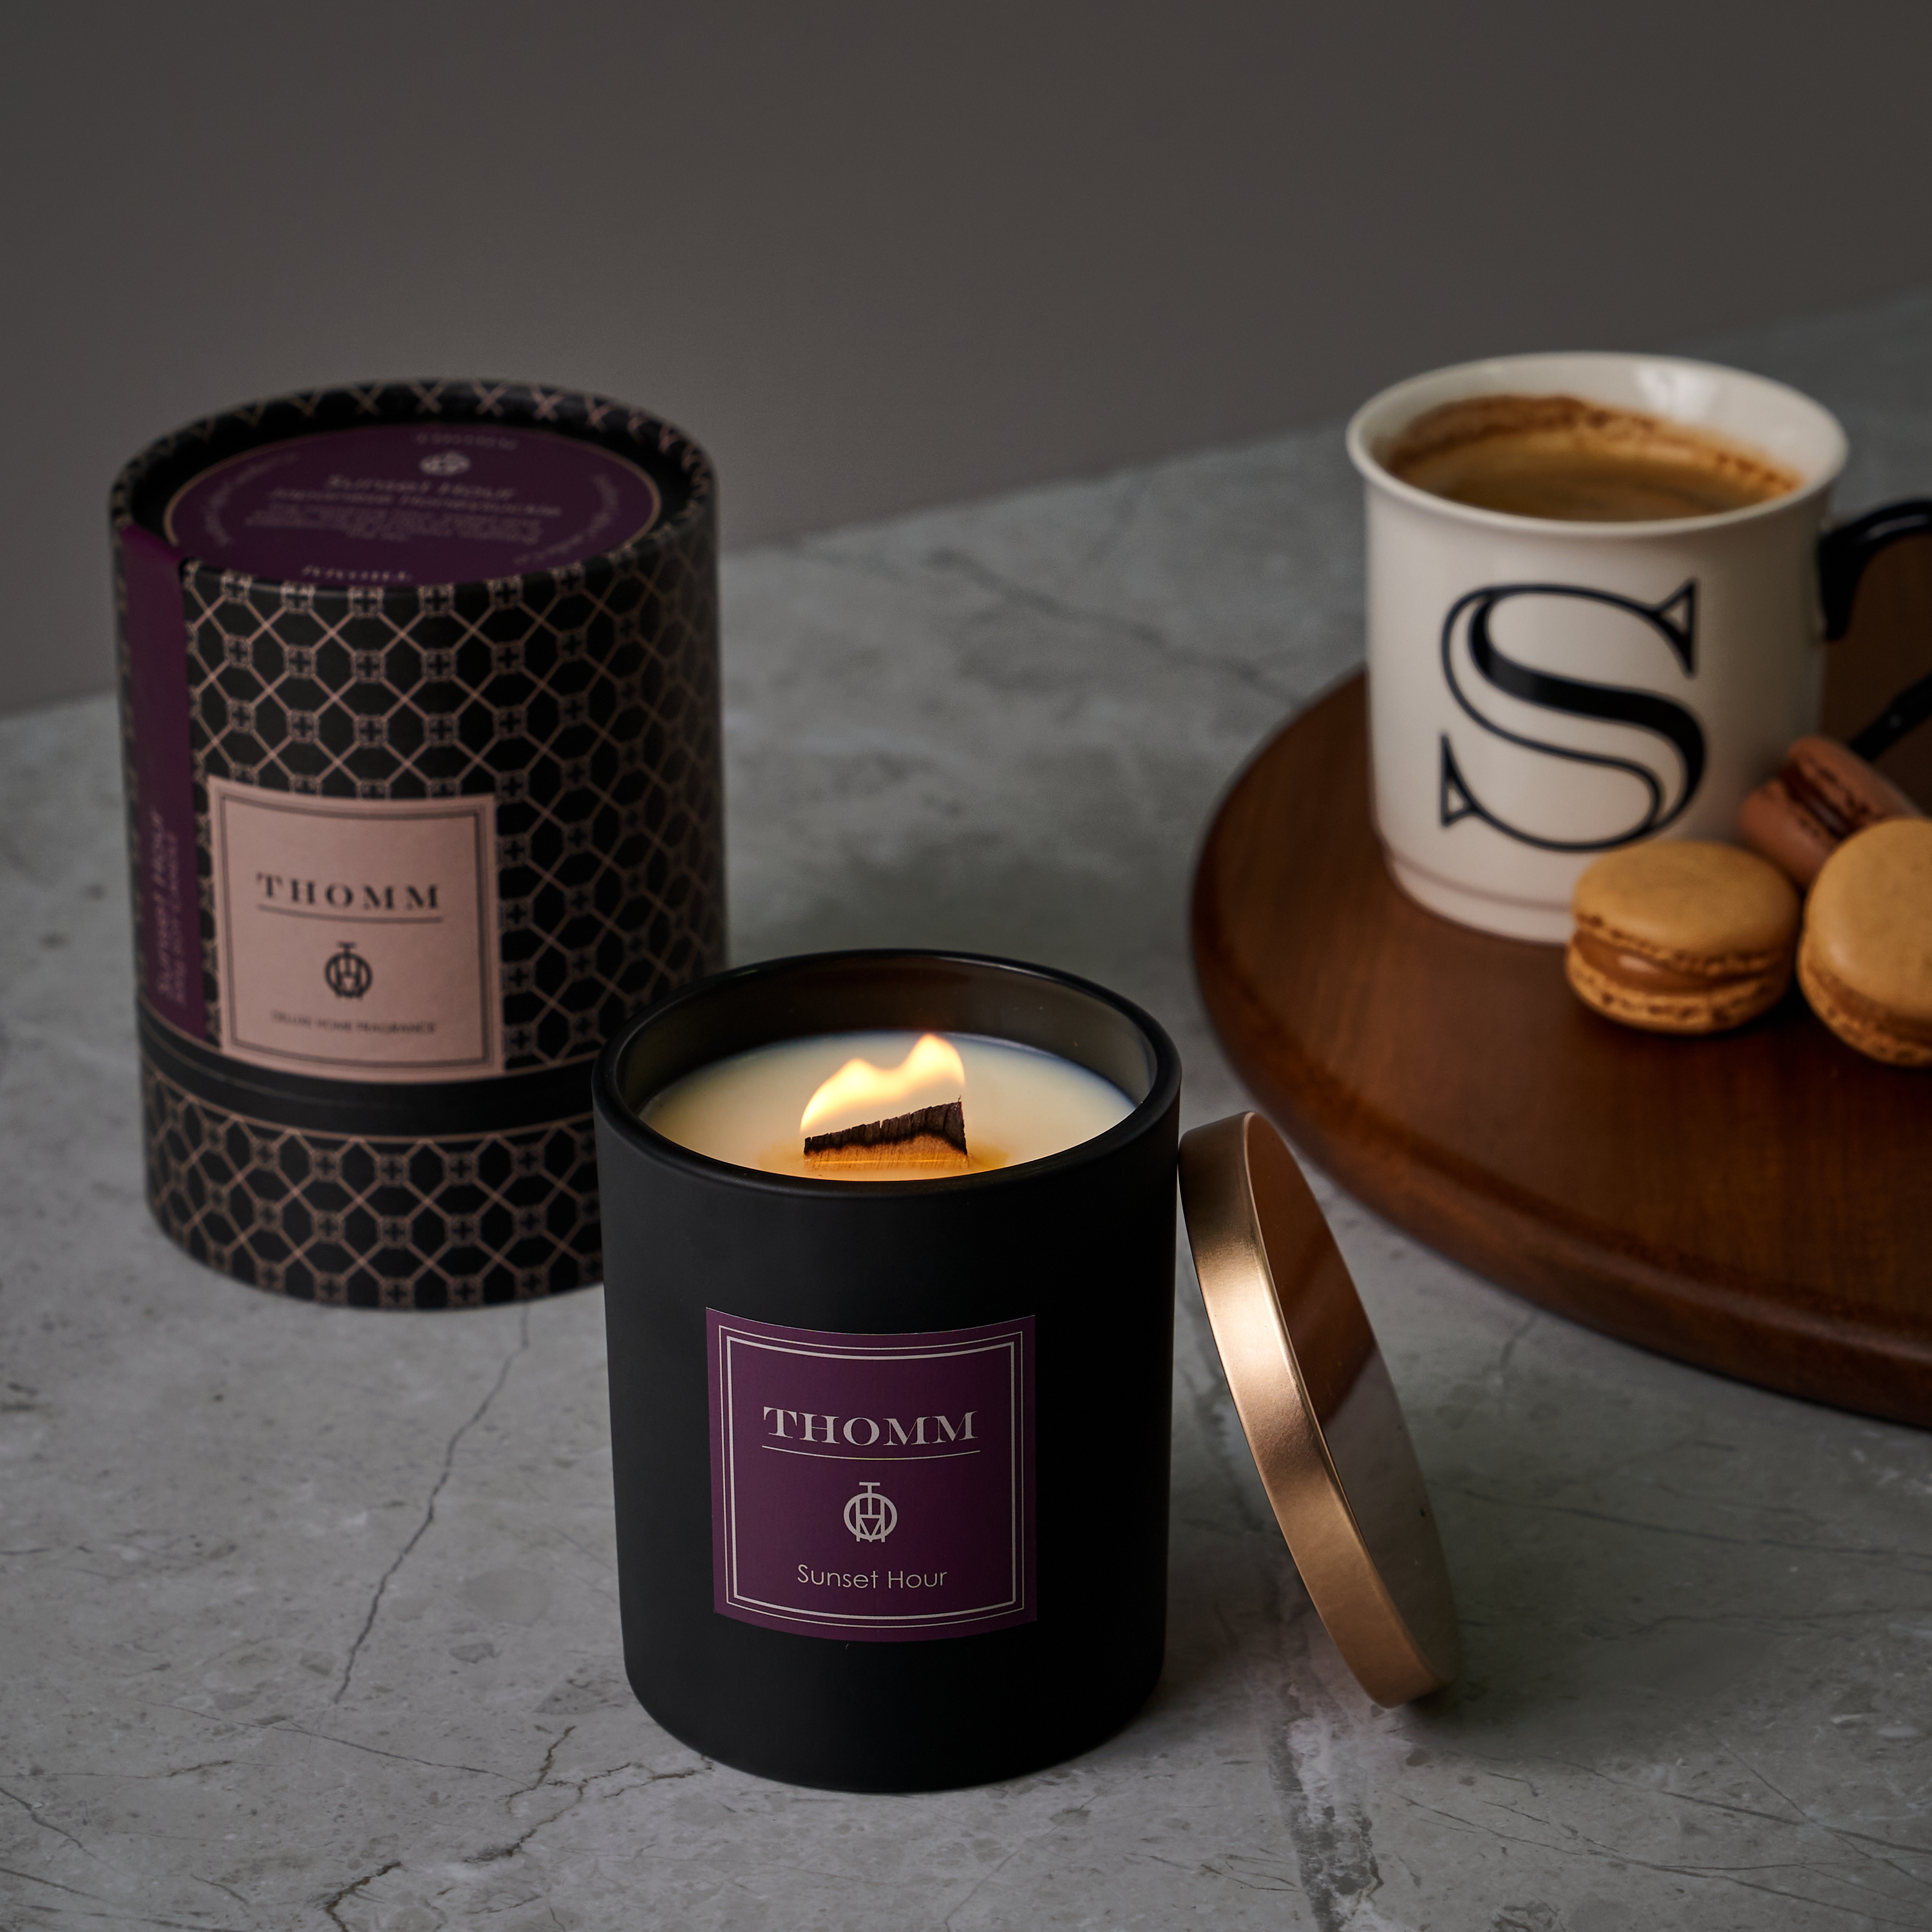 'Sunset Hour' (Japanese Honeysuckle) - 300g Soy Candle